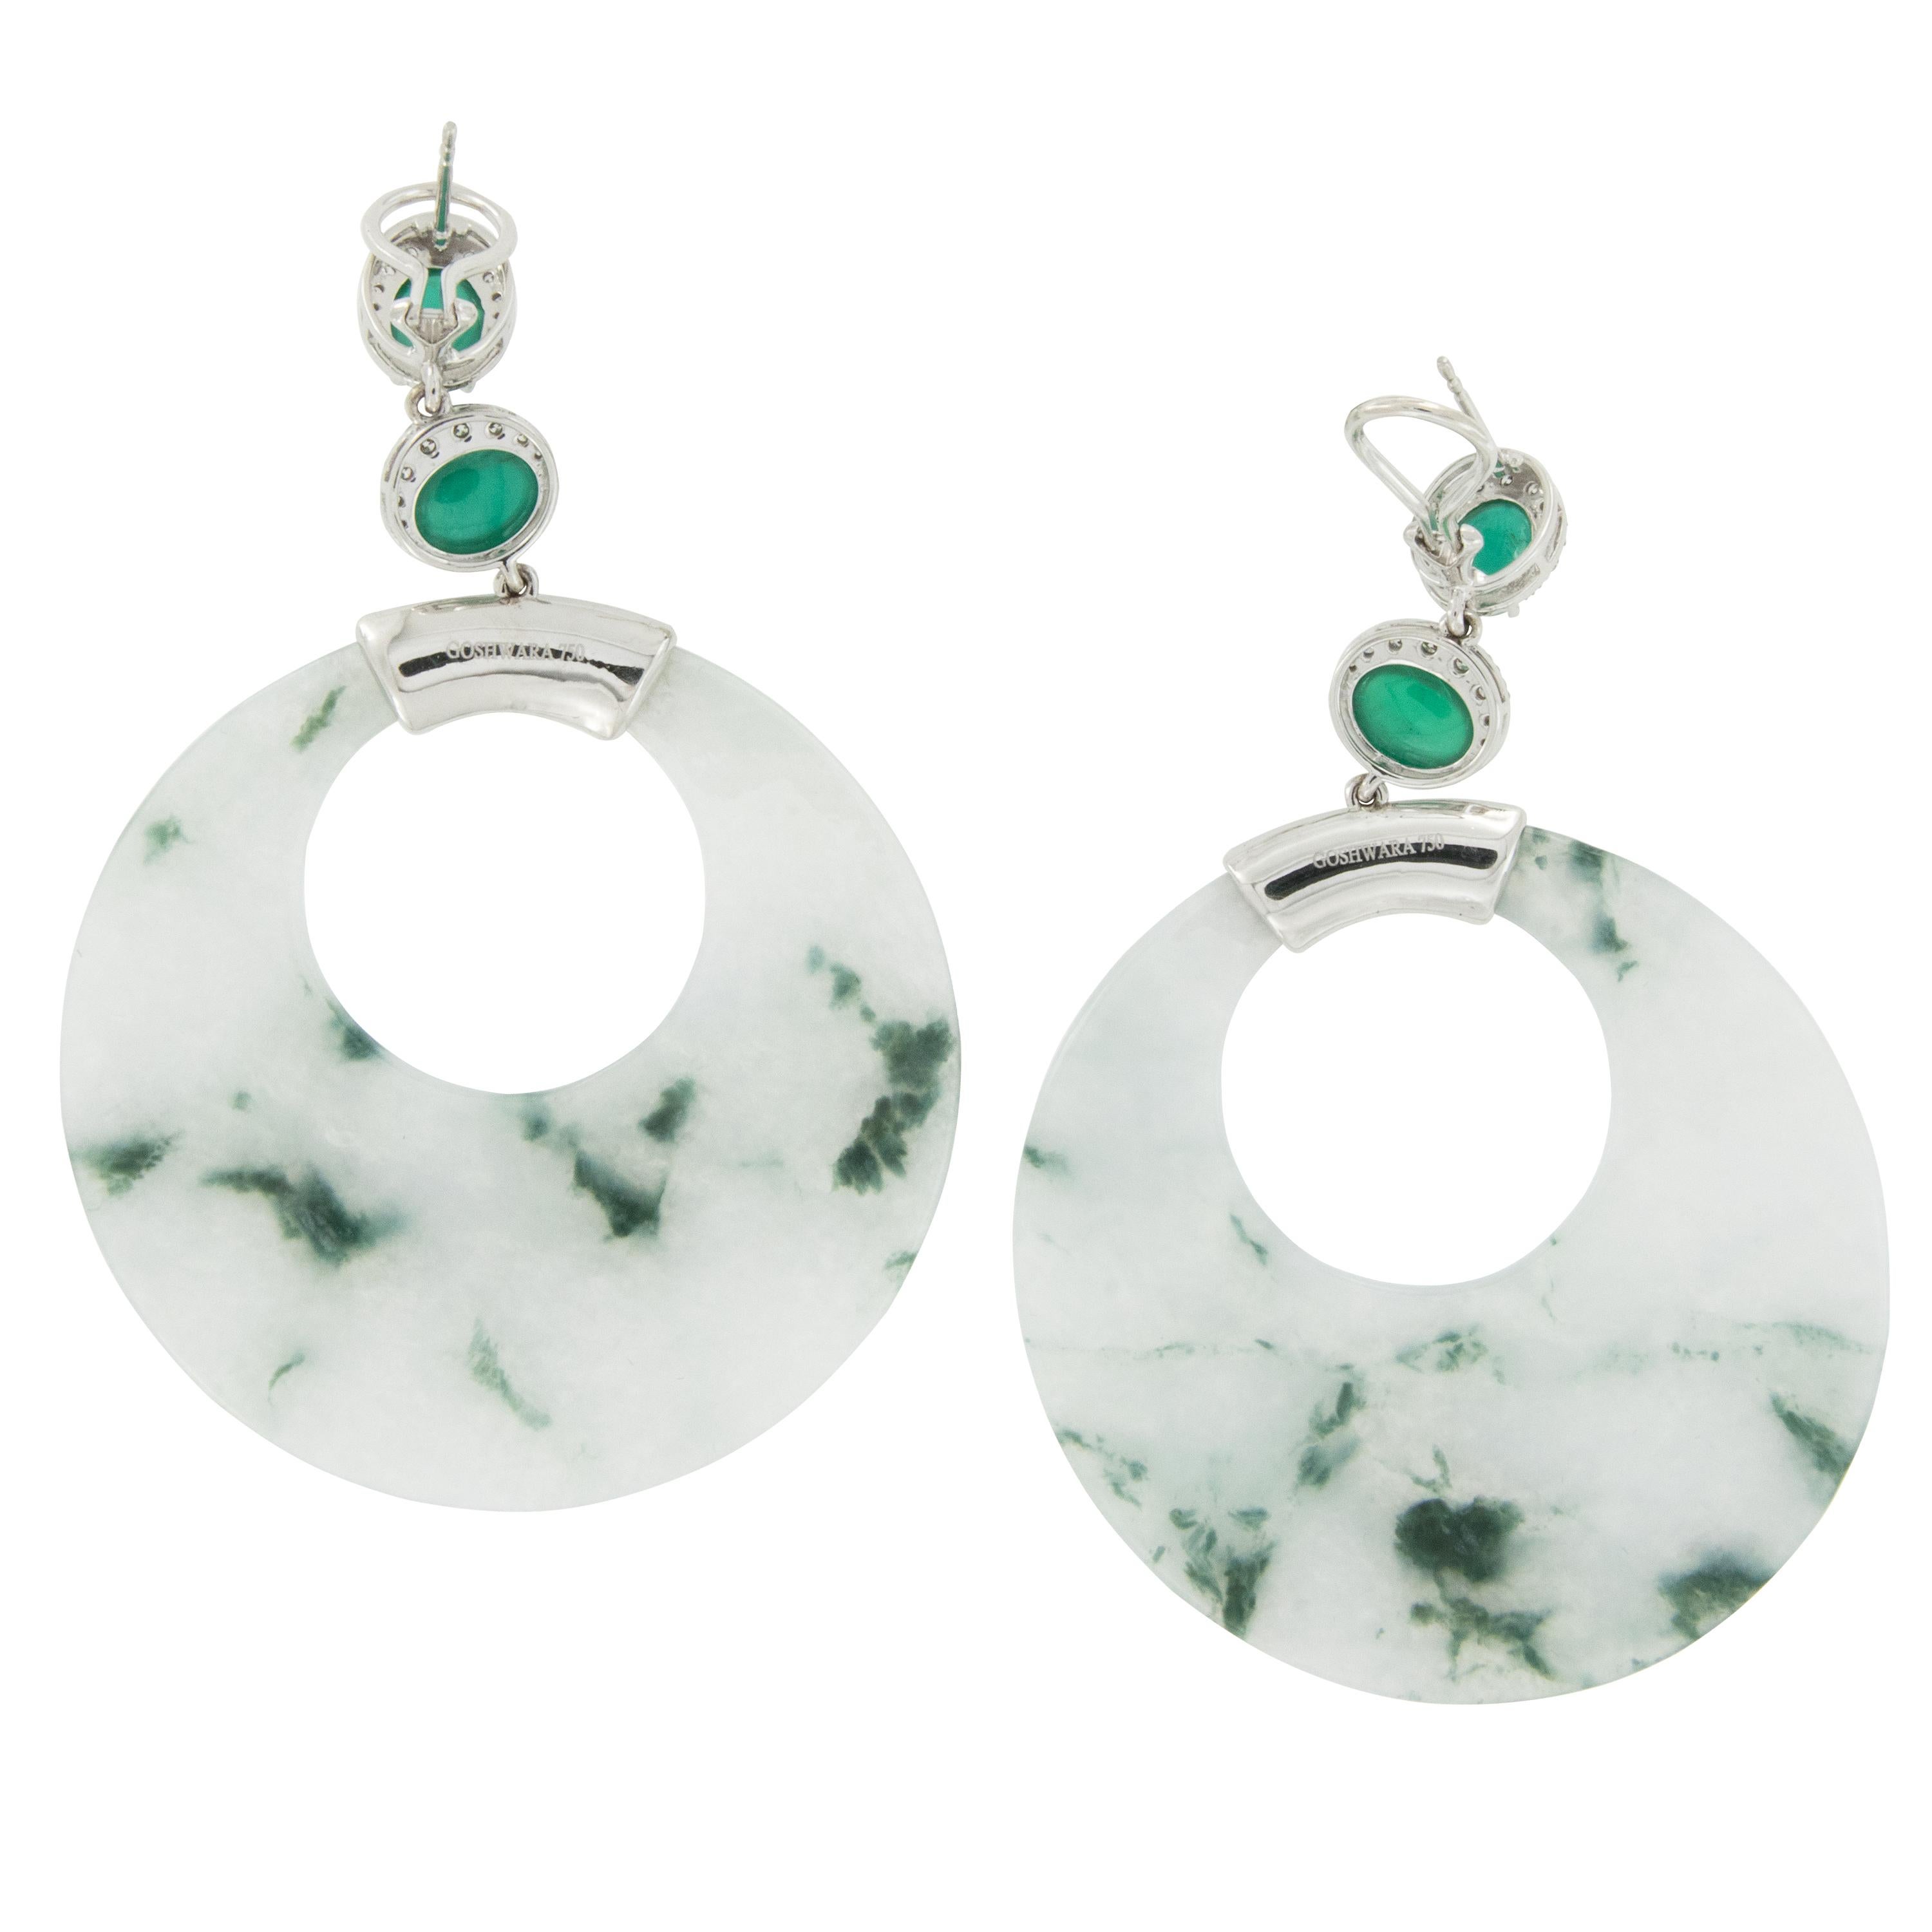 These earrings live up to the description of Goshwara's G-One collection - exclusive pieces composed of the rarest of gemstones and Goshwara’s traditionally exceptional craftsmanship! Moss in Snow jade or Hua hsueh tai tsao (“moss entangled in